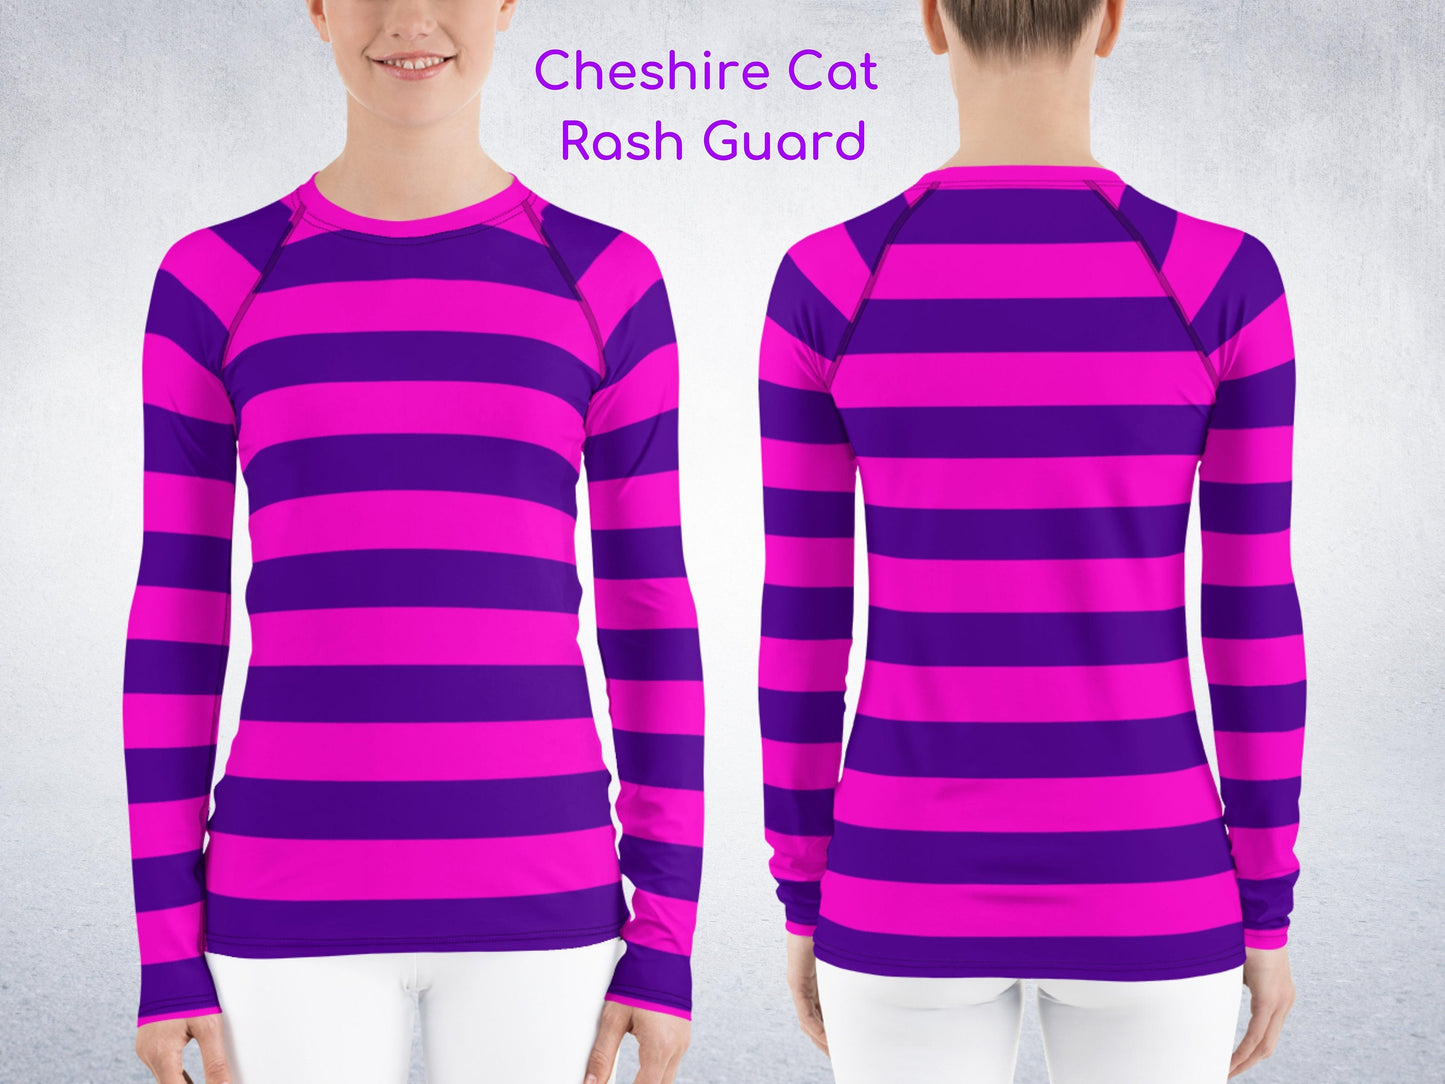 Cheshire Cat Inspired Rash Guard, Alice in Wonderland Top, Cosplay, Adult Halloween Costume, Cosplay Outfit, Mad Hatter, Gift for Her